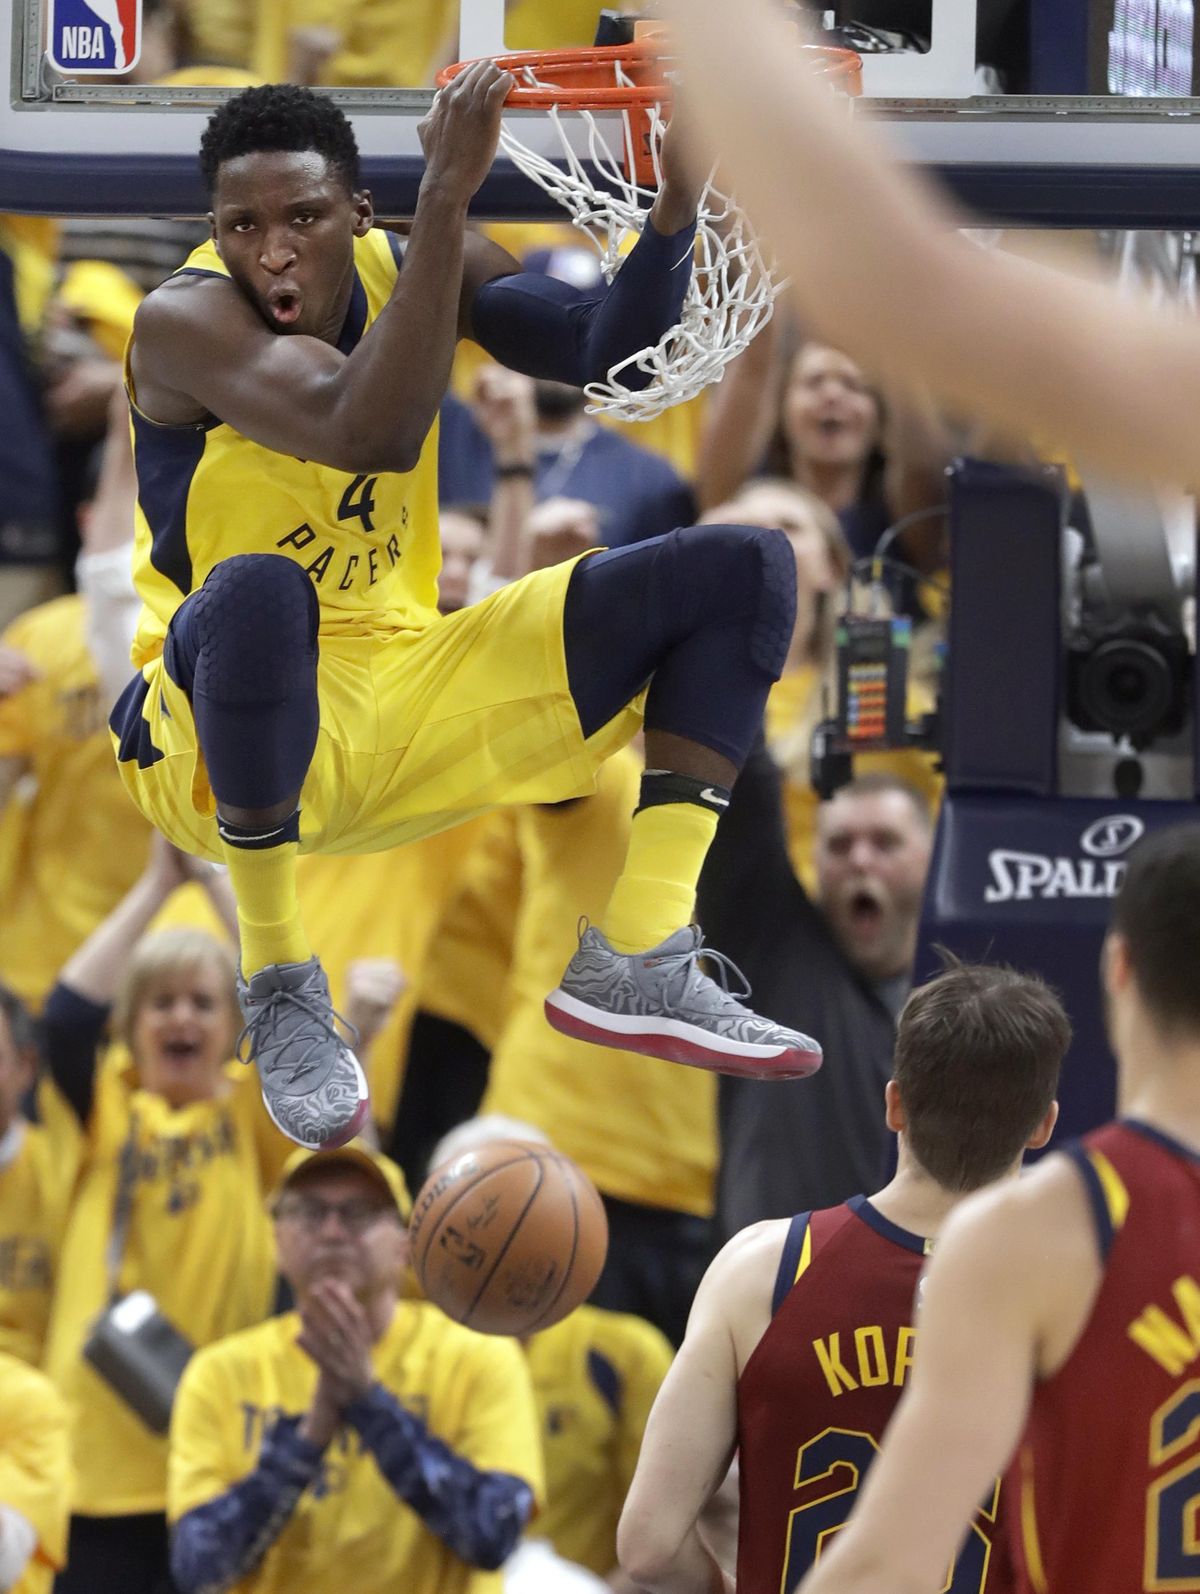 Indiana Pacers’ Victor Oladipo dunks during the first half of Game 6 of a first-round NBA basketball playoff series against the Cleveland Cavaliers, Friday, April 27, 2018, in Indianapolis. (Darron Cummings / Associated Press)